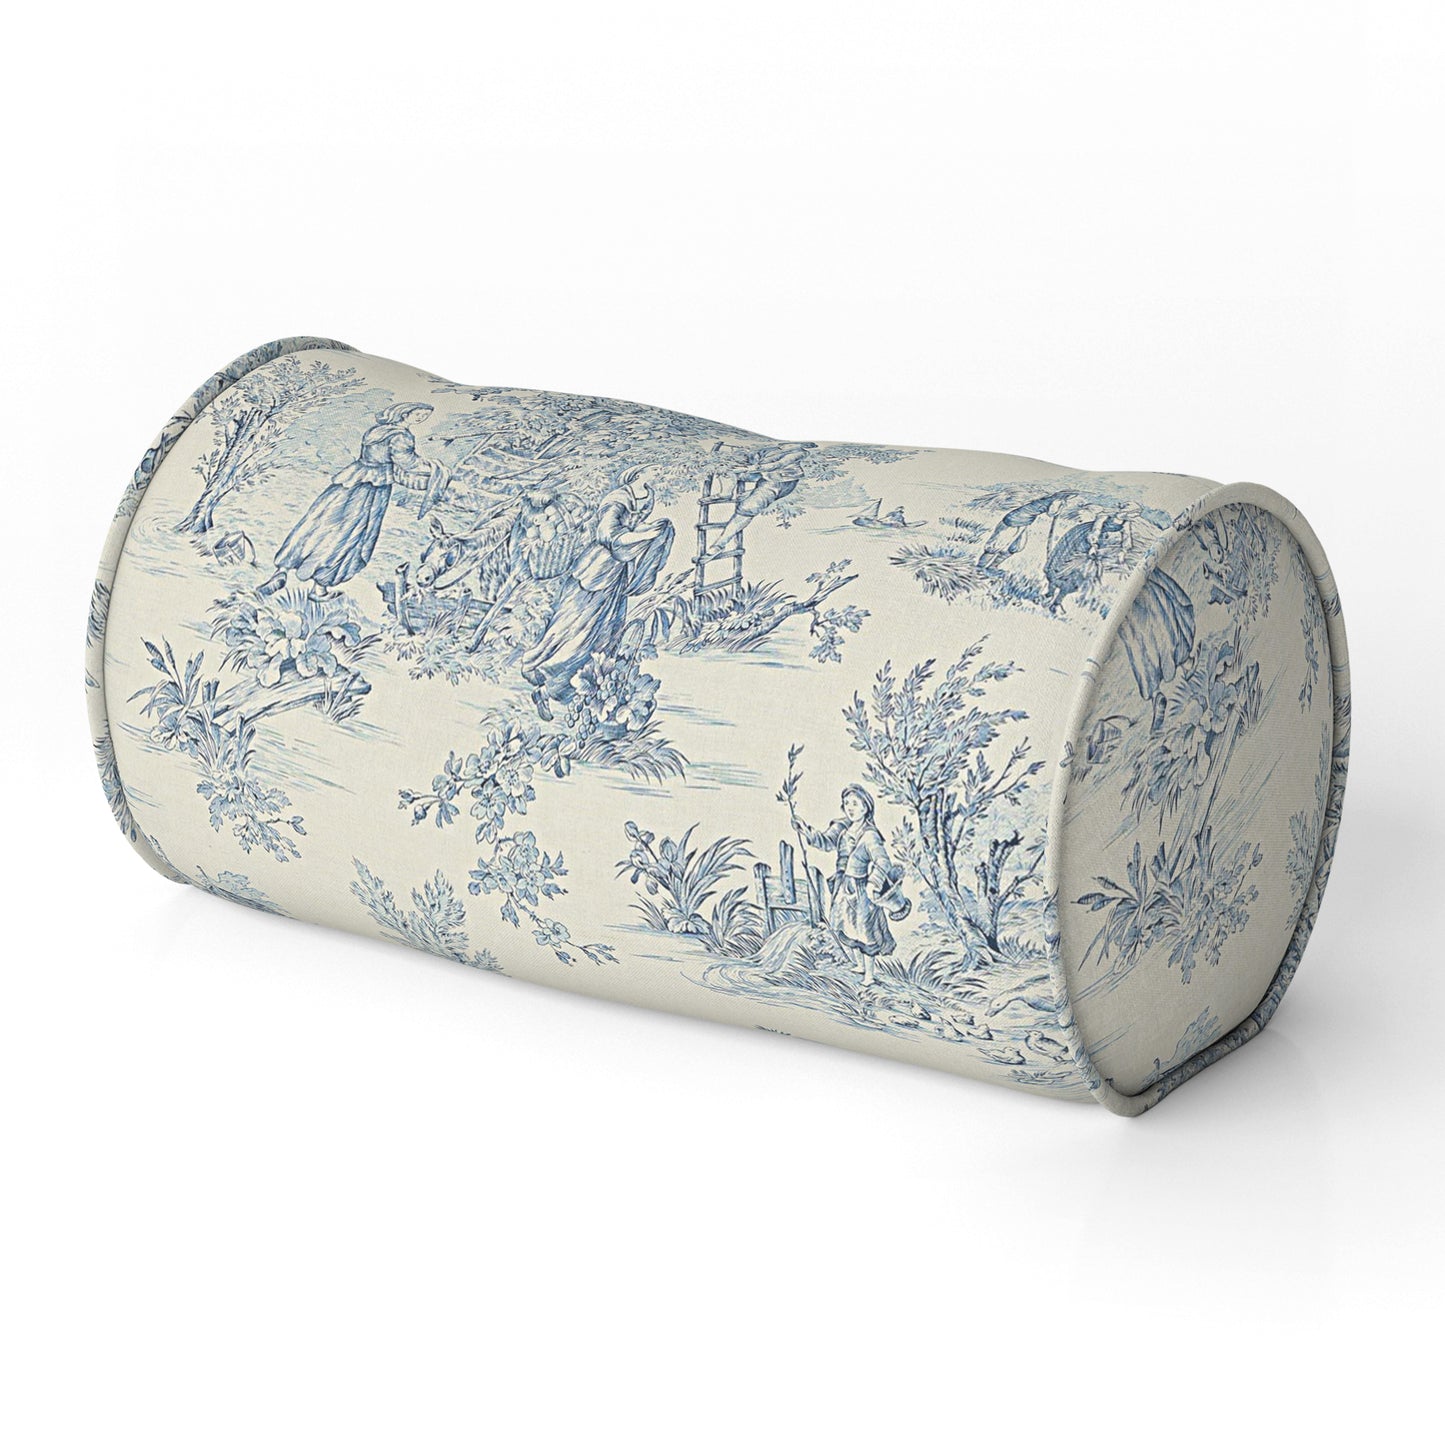 Decorative Pillows in Pastorale #2 Blue on Cream French Country Toile